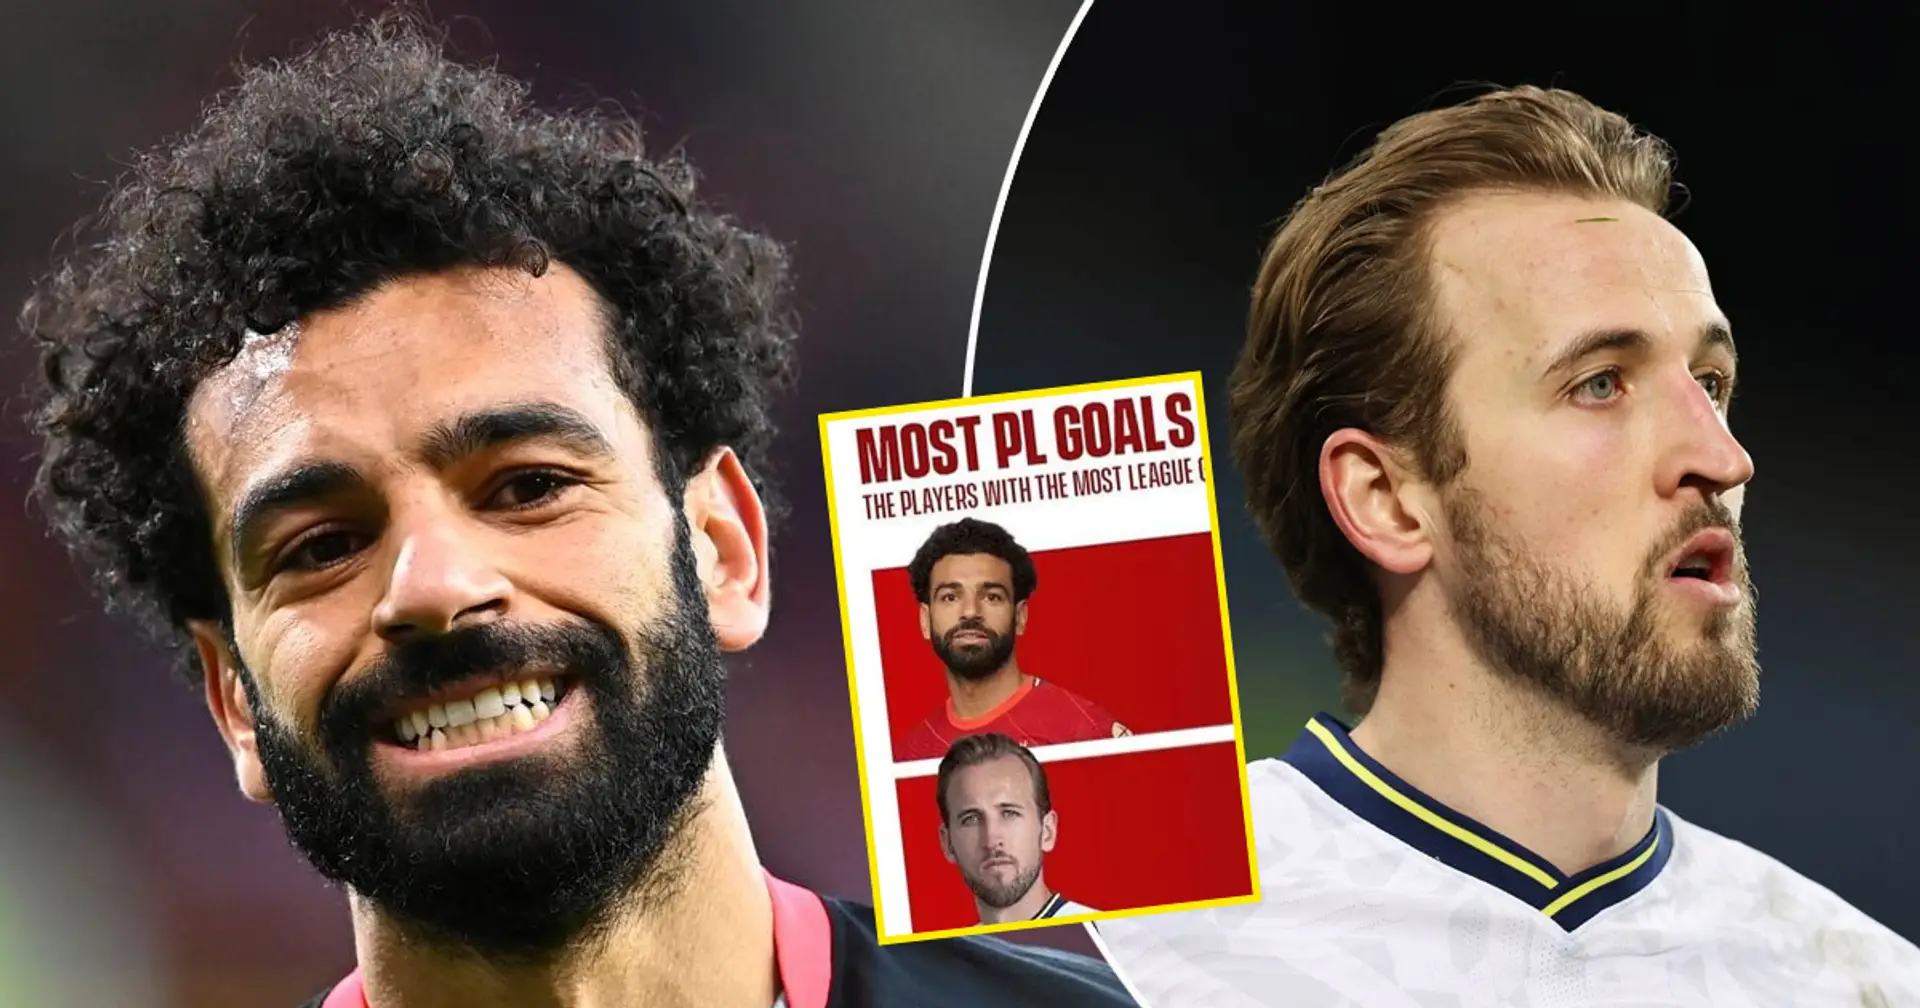 Stat of the day: No player scored more Premier League goals than Mo Salah since his move to Liverpool